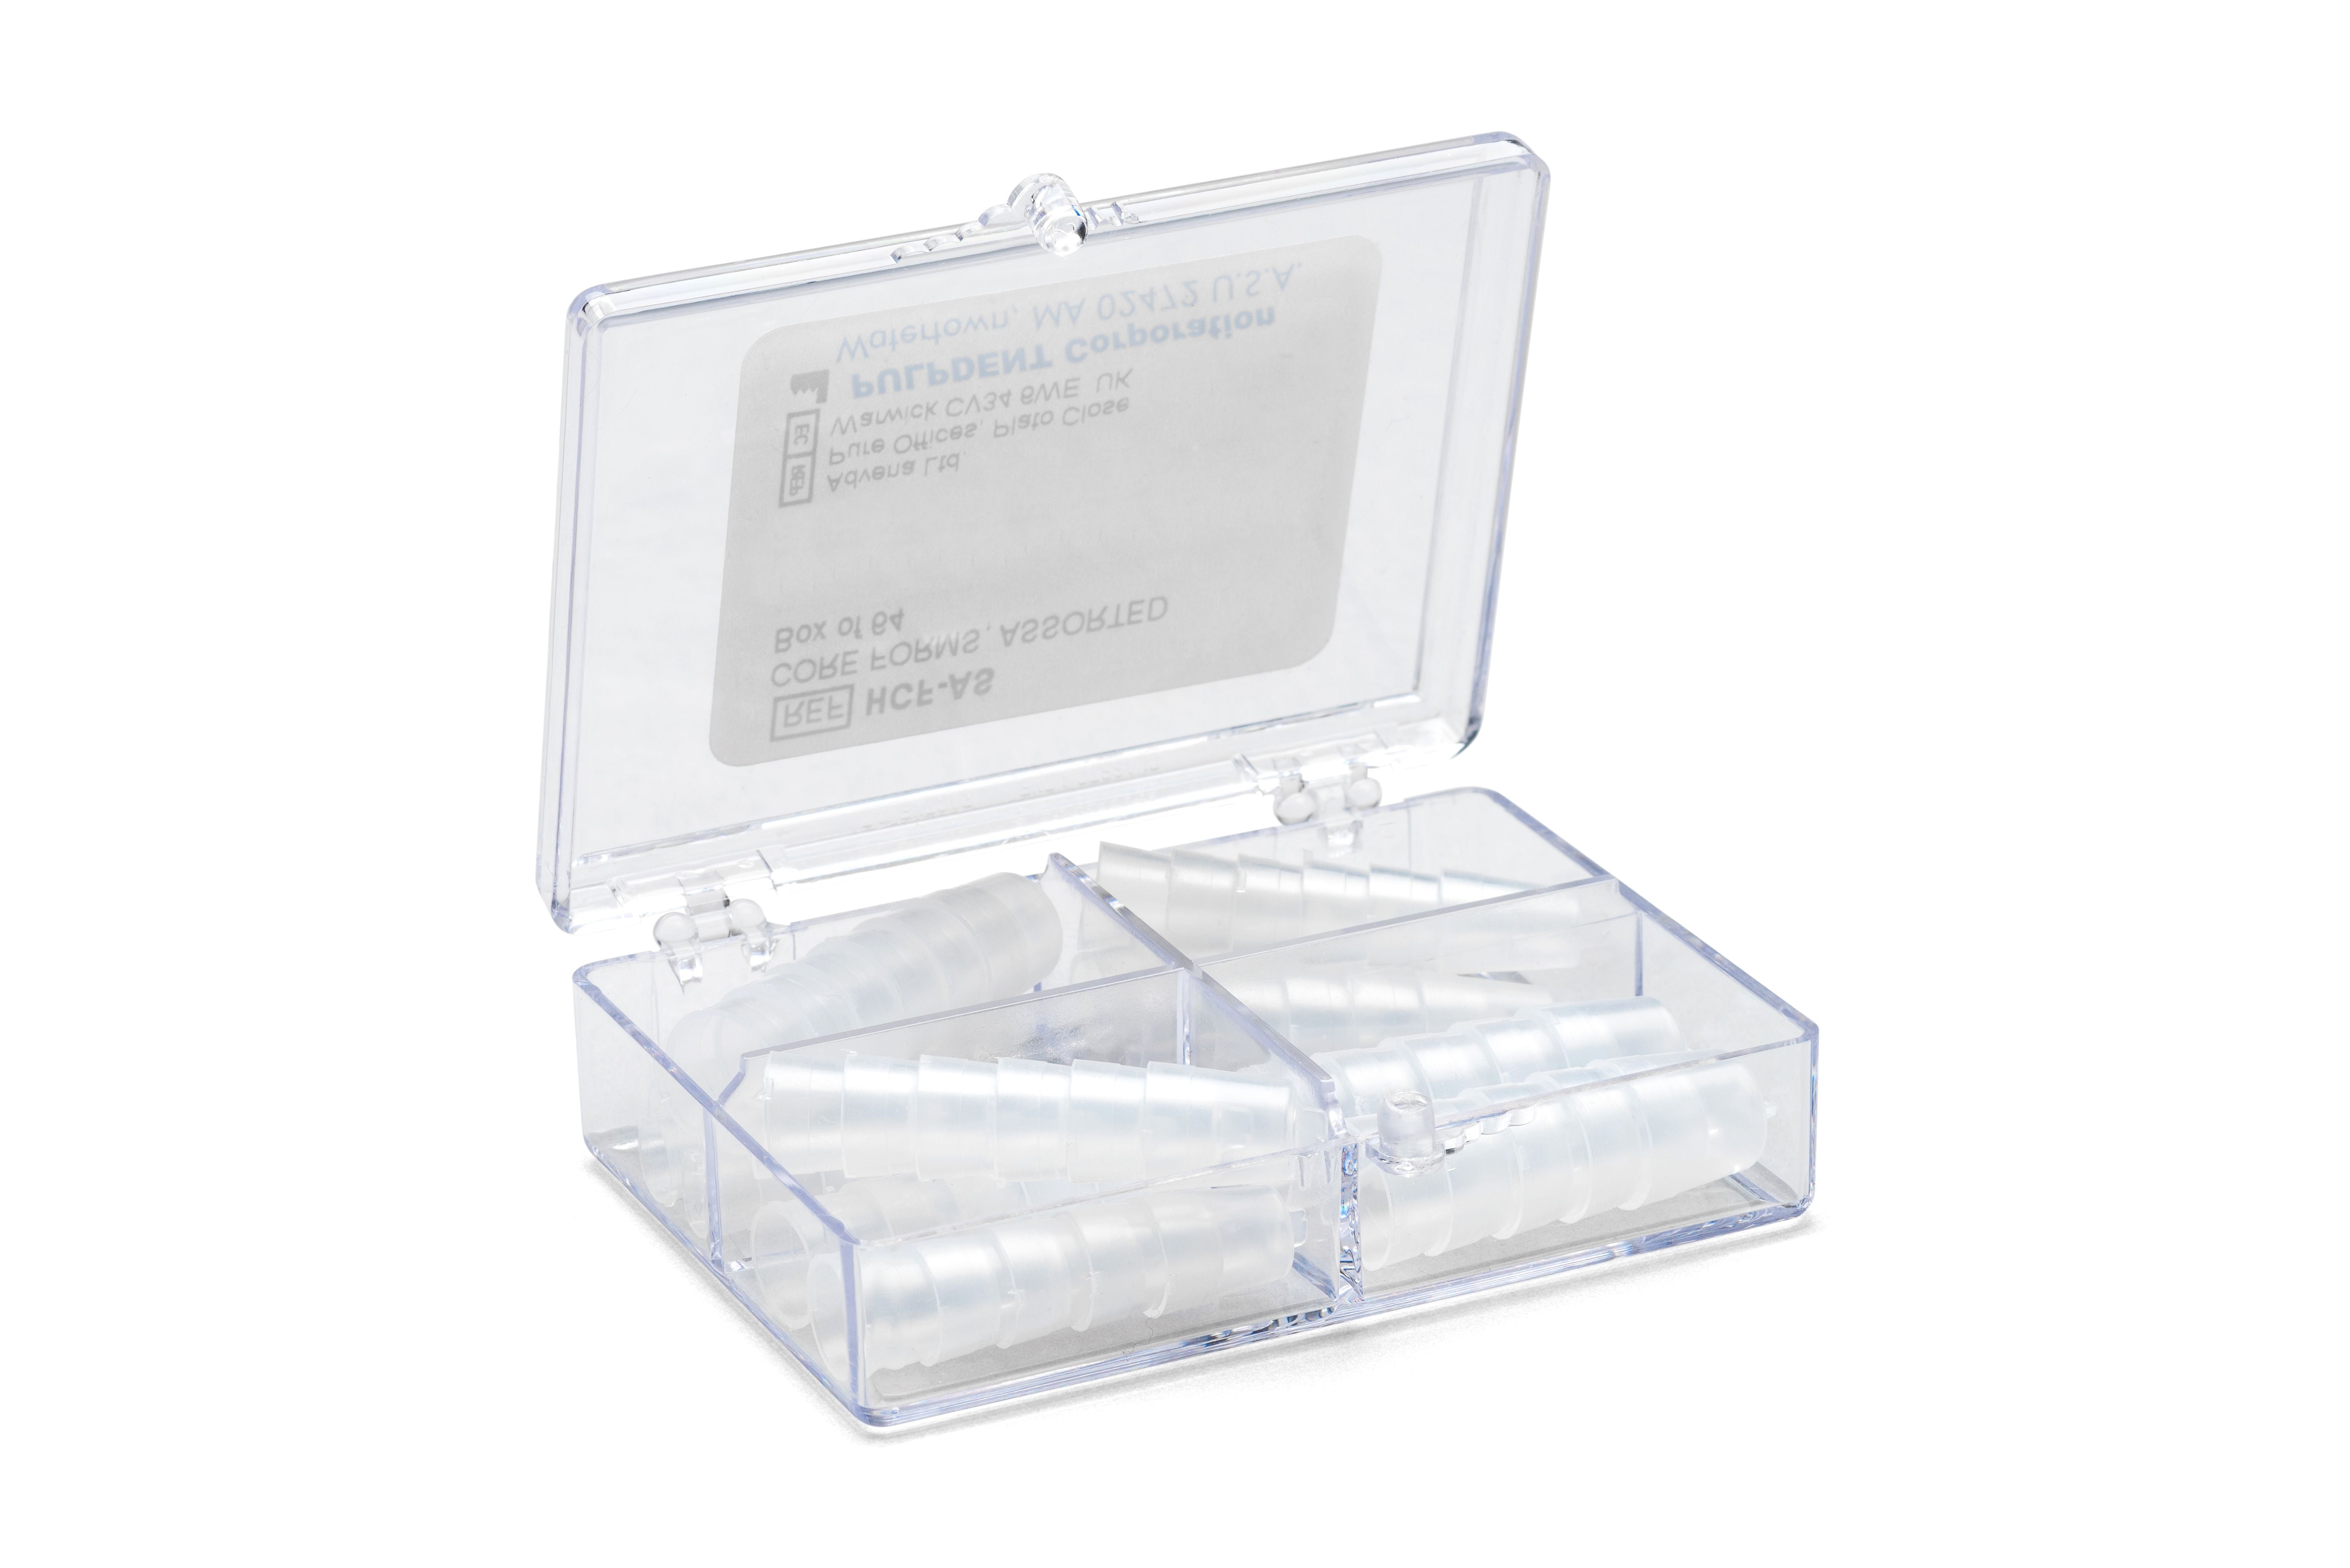 Core Forms, Box of 64